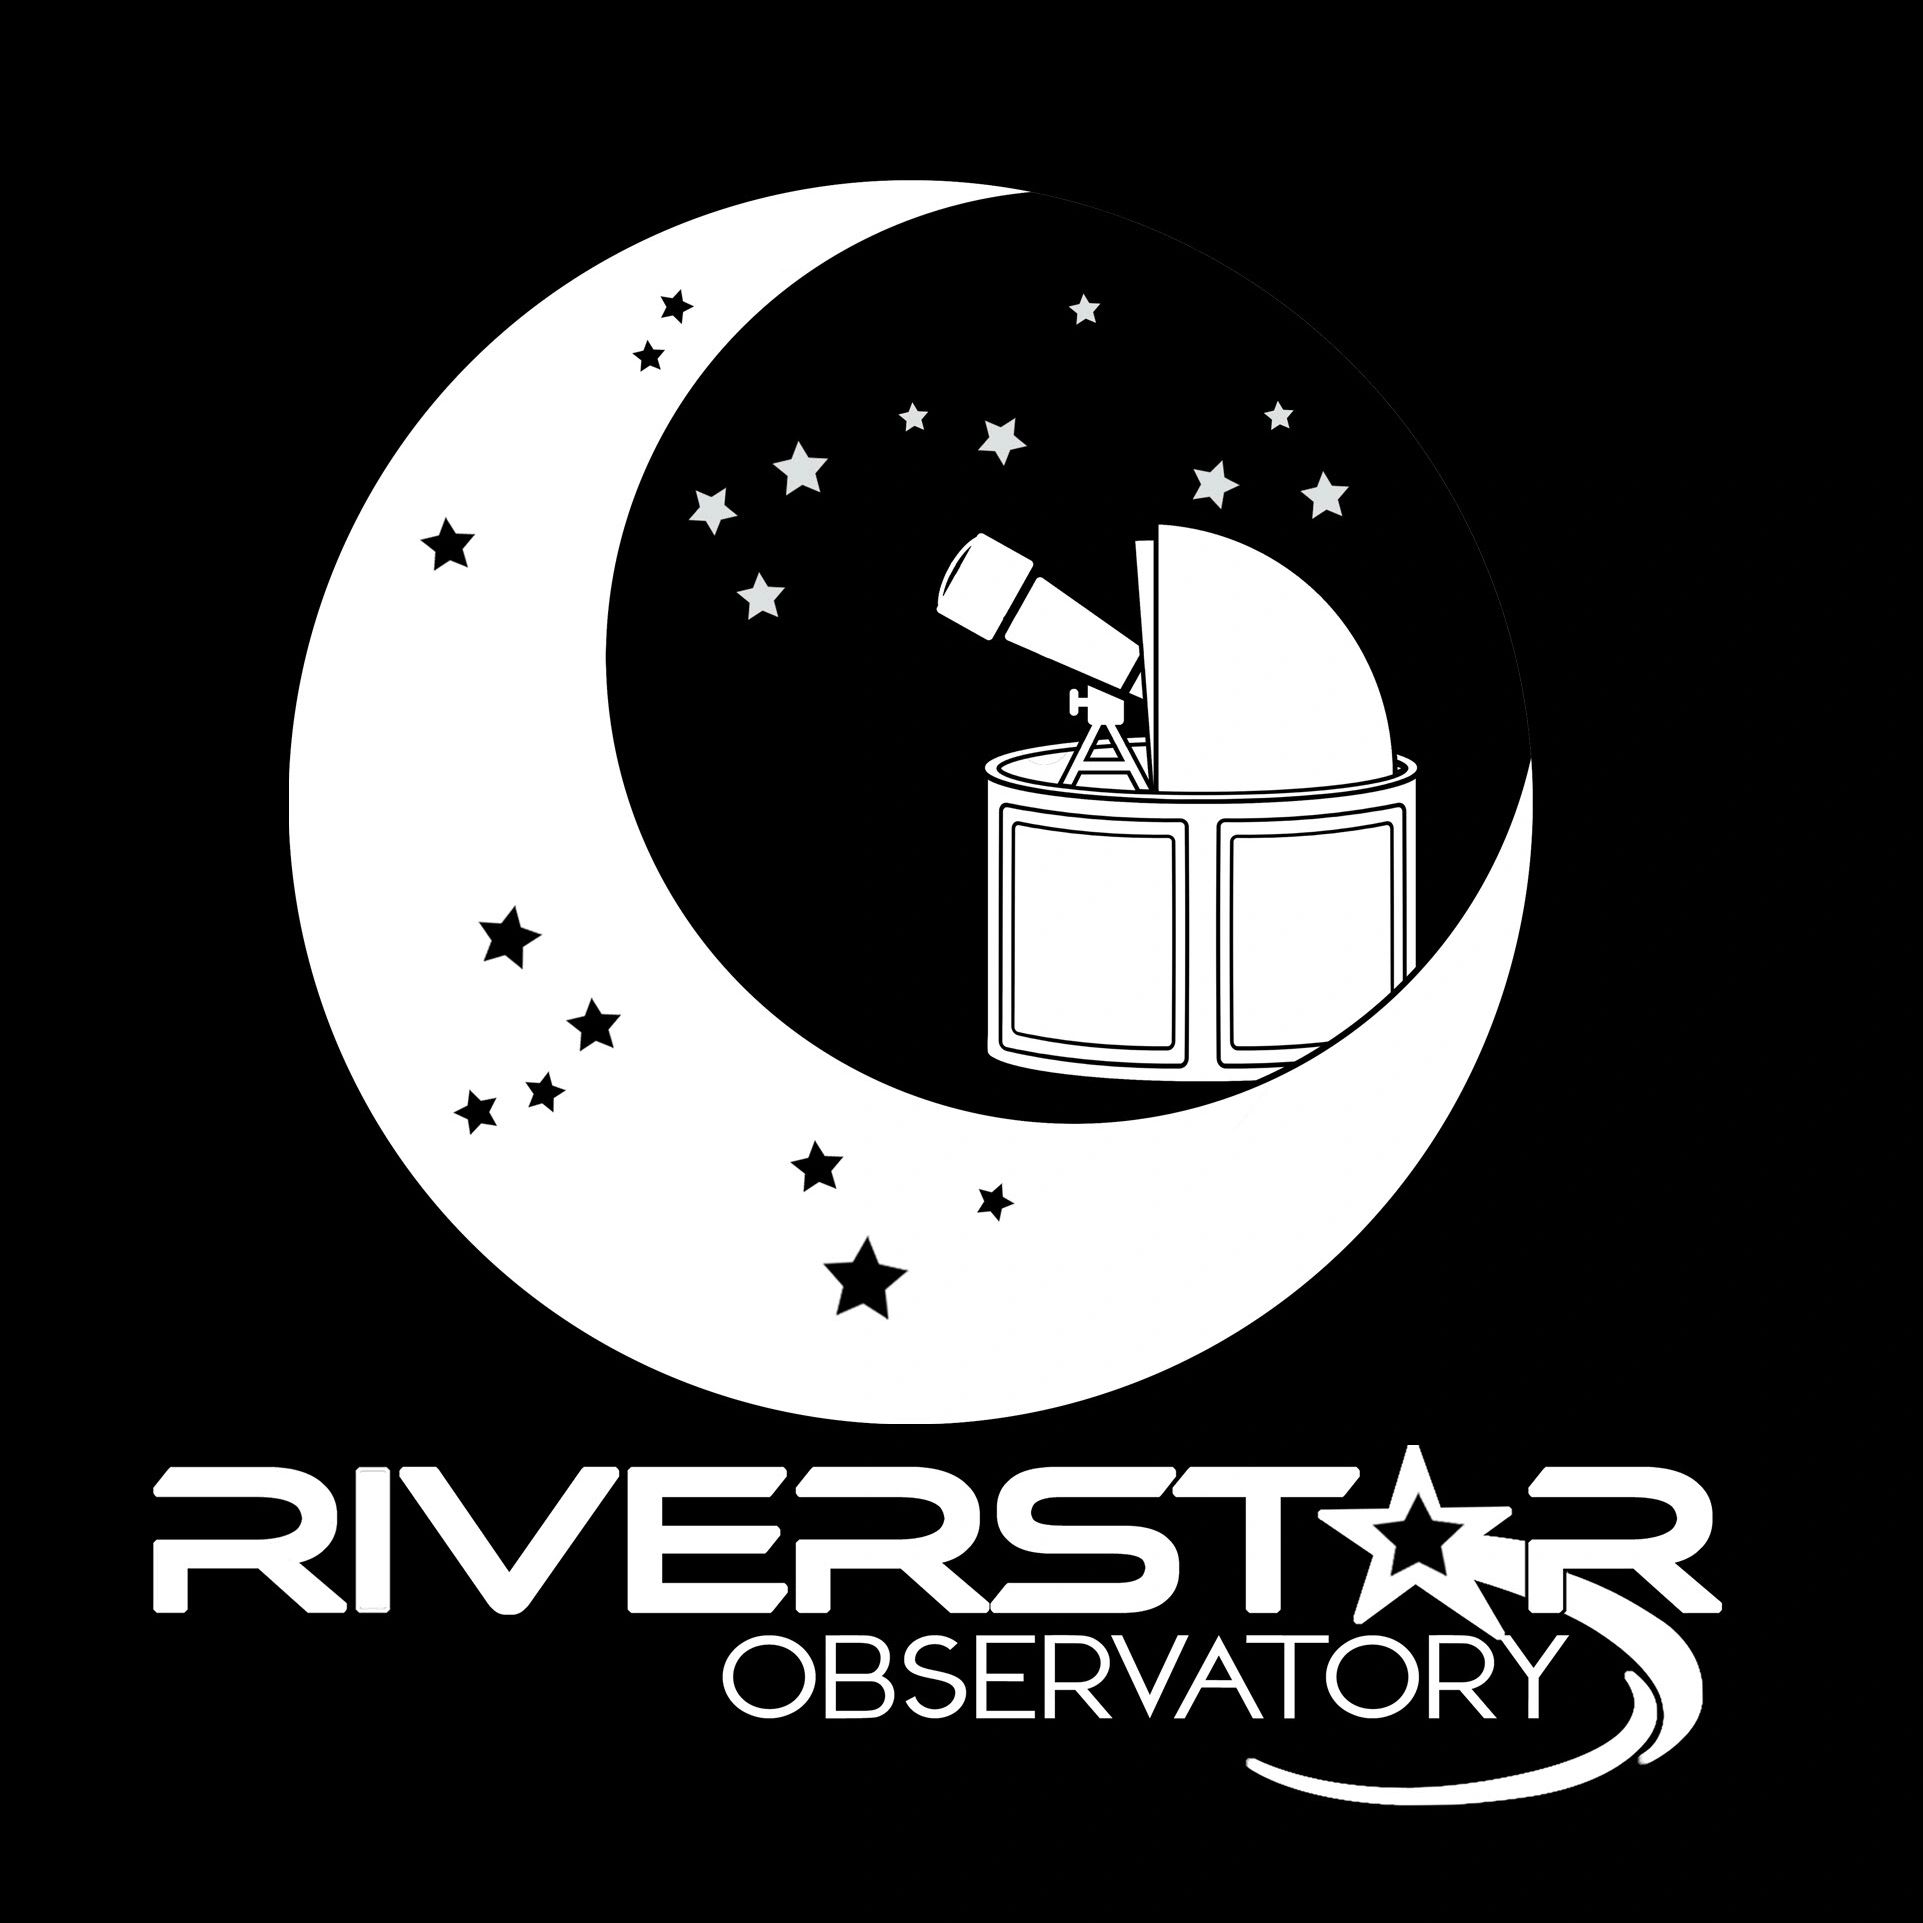 Riverstar Observatory looks deep into the cosmos to advance the understanding of life on earth